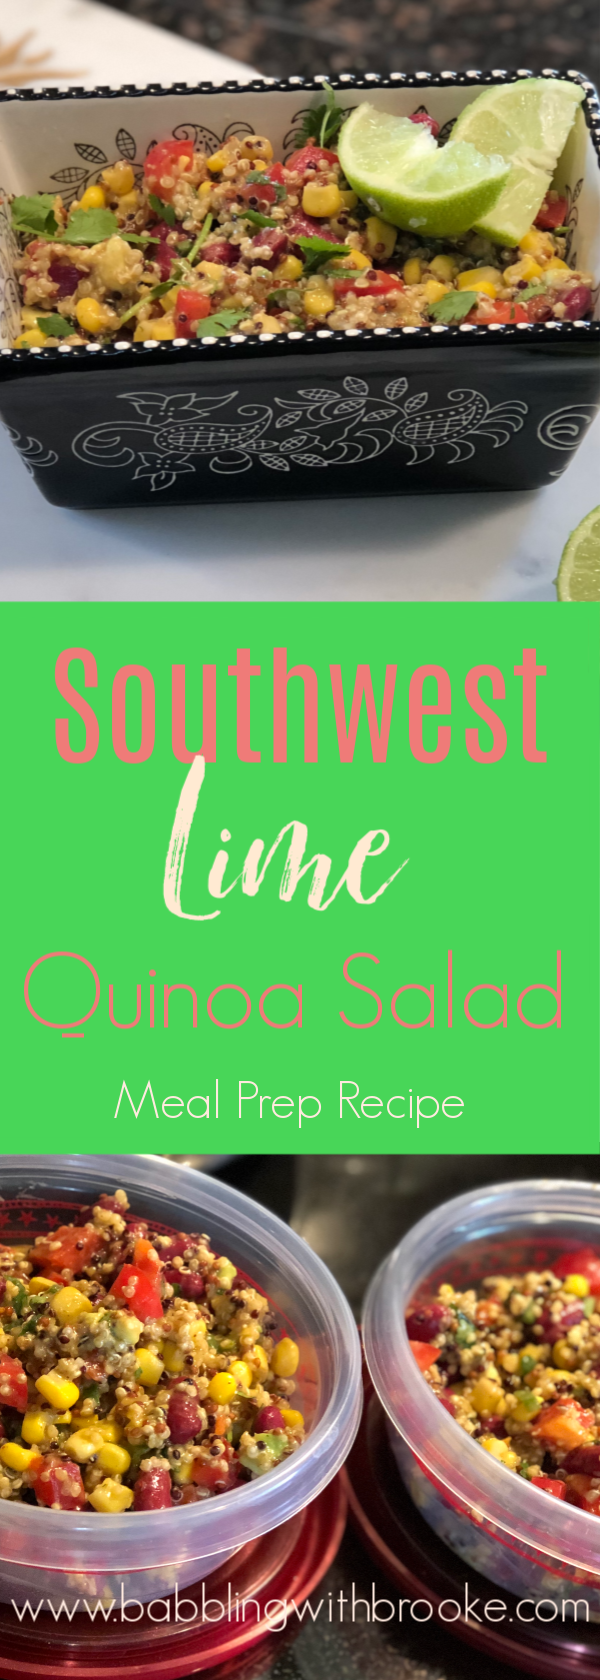 This southwest lime quinoa salad is the perfect meal prep recipe! This meal prep lunch recipe is healthy, easy to make and delicious too! Perfect for a fast meal prep recipe. #easymealprep #mealpreprecipe #easylunchrecipe #healthymealpreprecipe #healthylunchrecipe